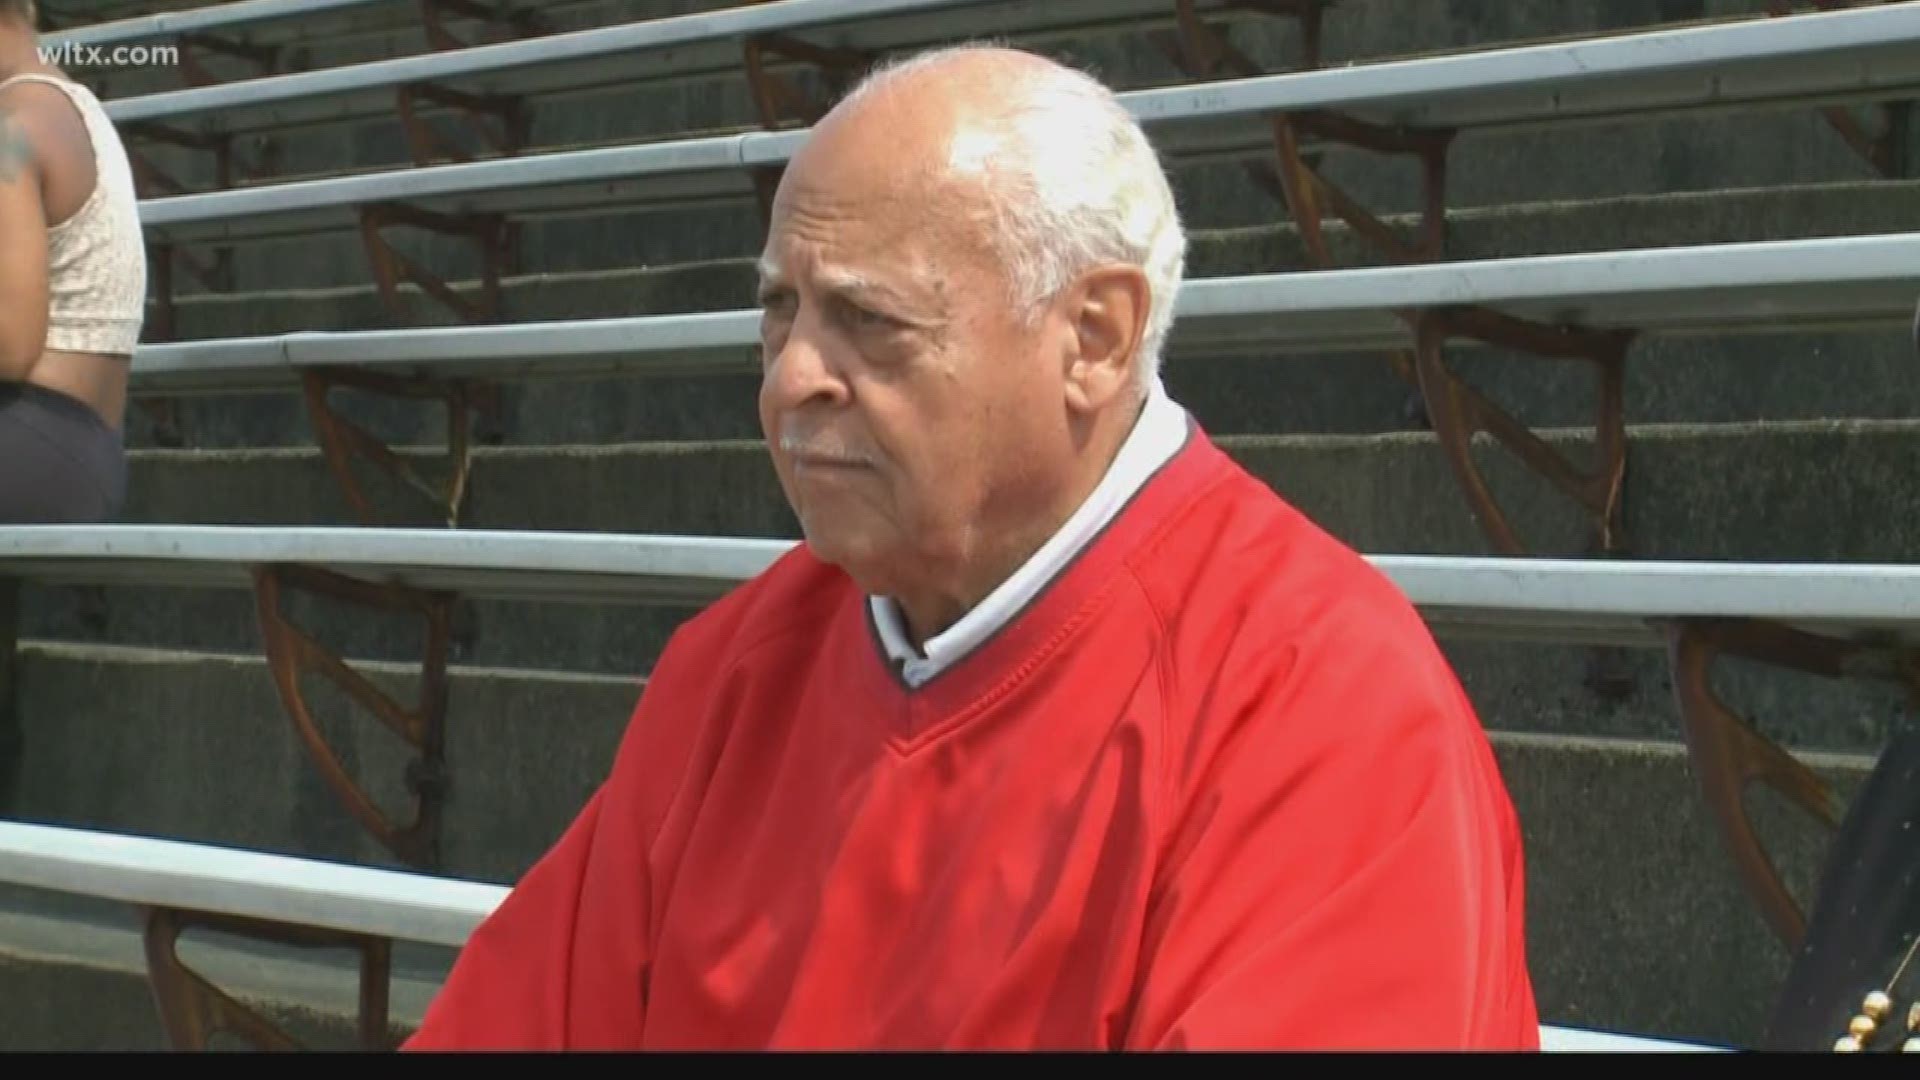 The all-time winningest coach at South Carolina State is one of Buddy Pough's biggest fans.